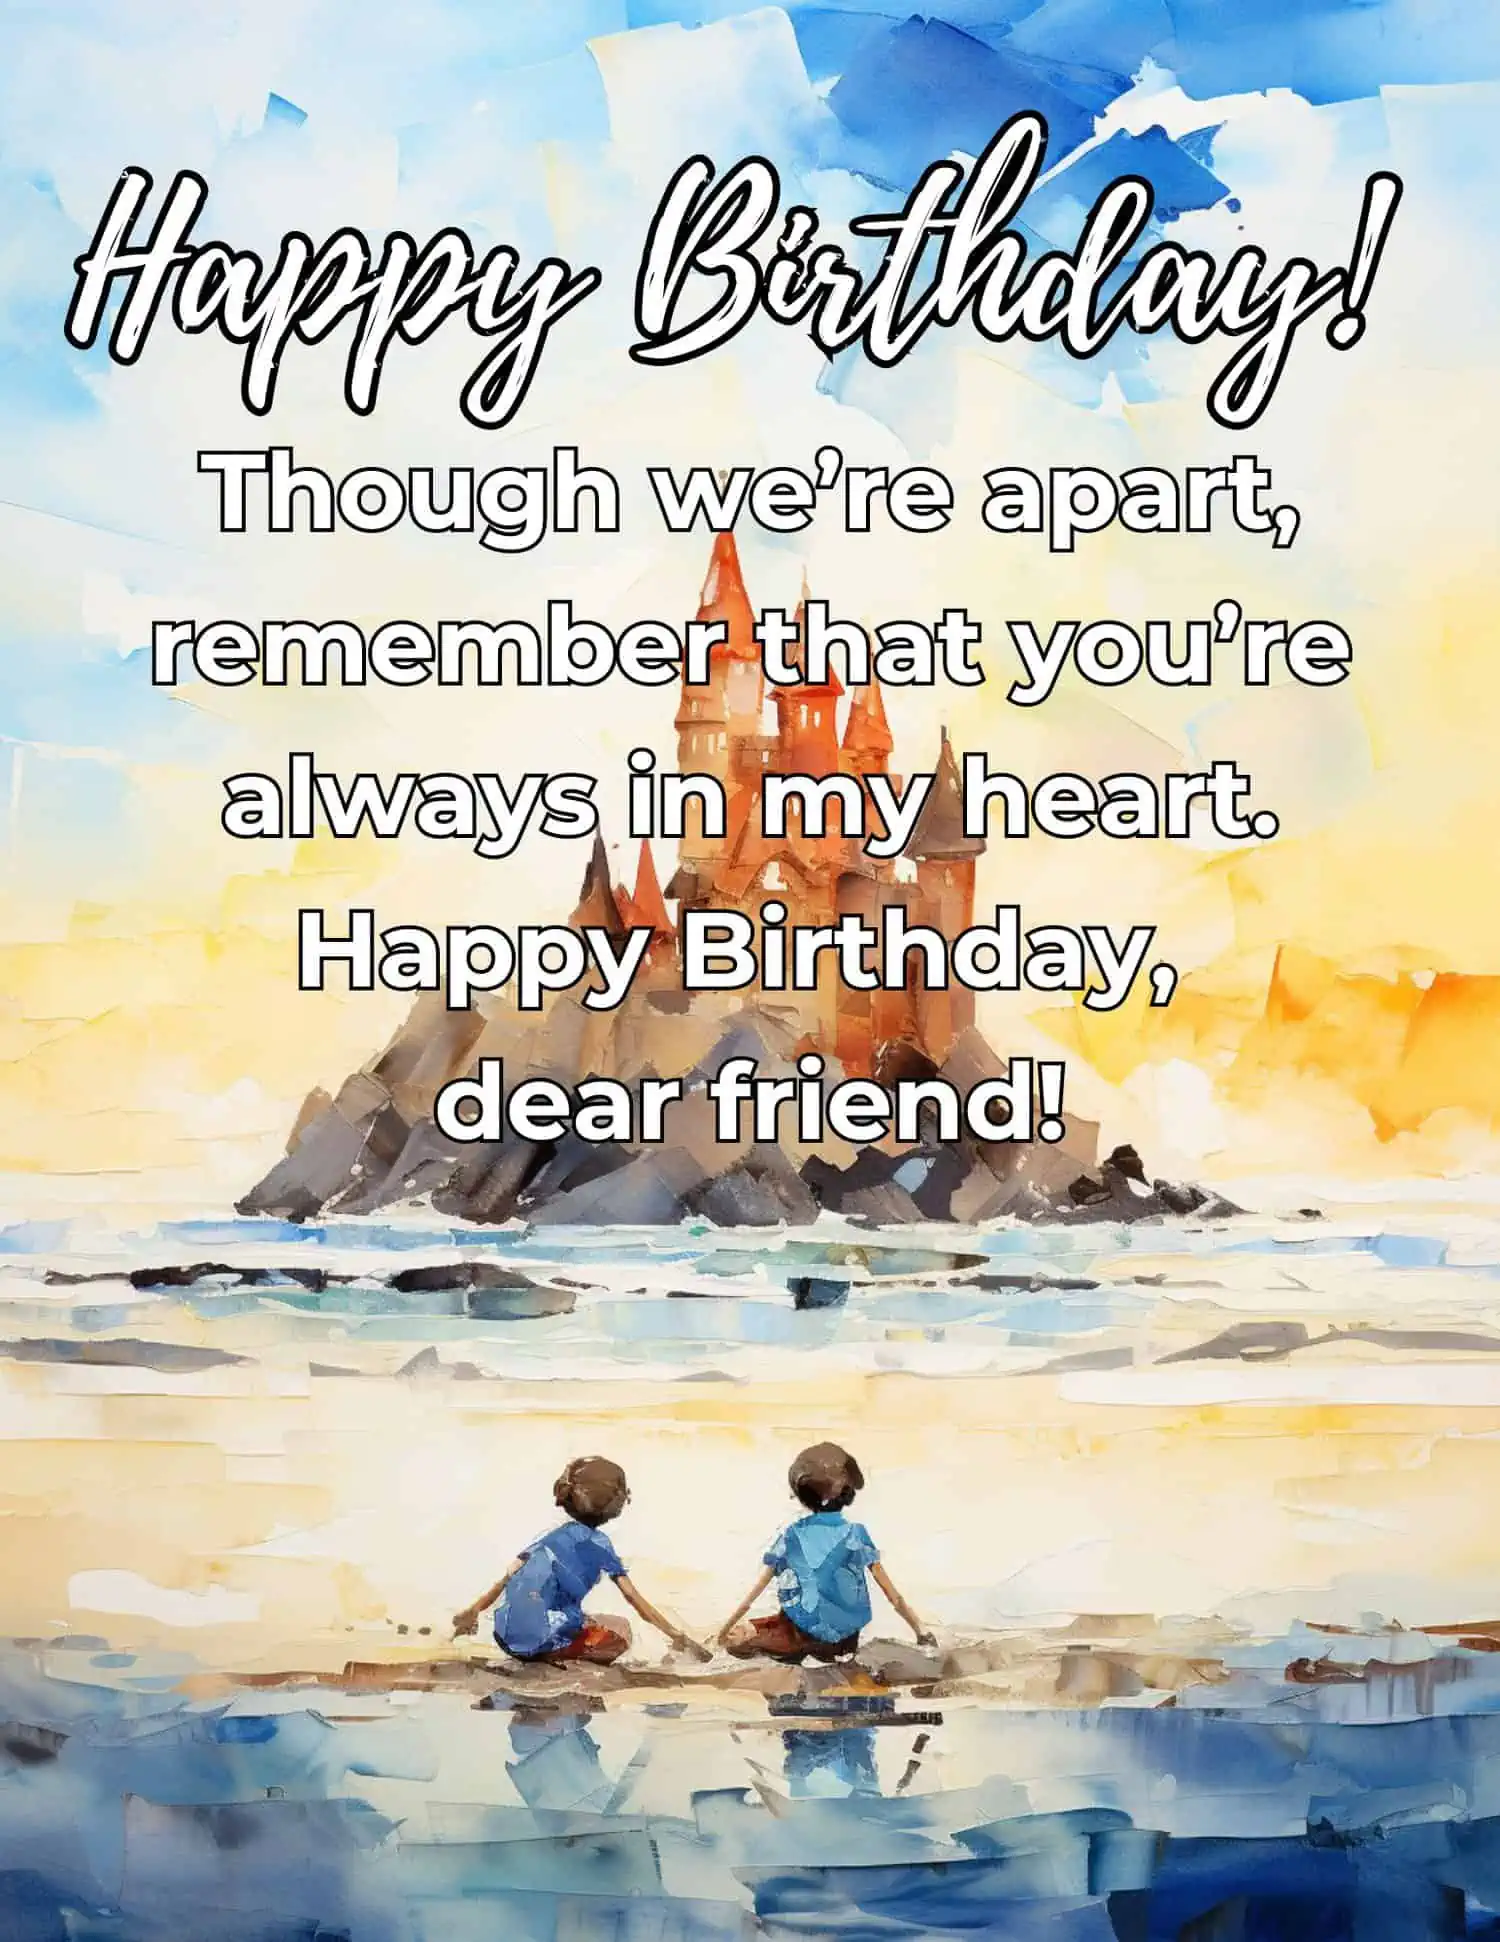 Navigate the distance with heartfelt and thoughtful birthday messages, each tailored to make your long-distance best friend feel close and cherished on their birthday.